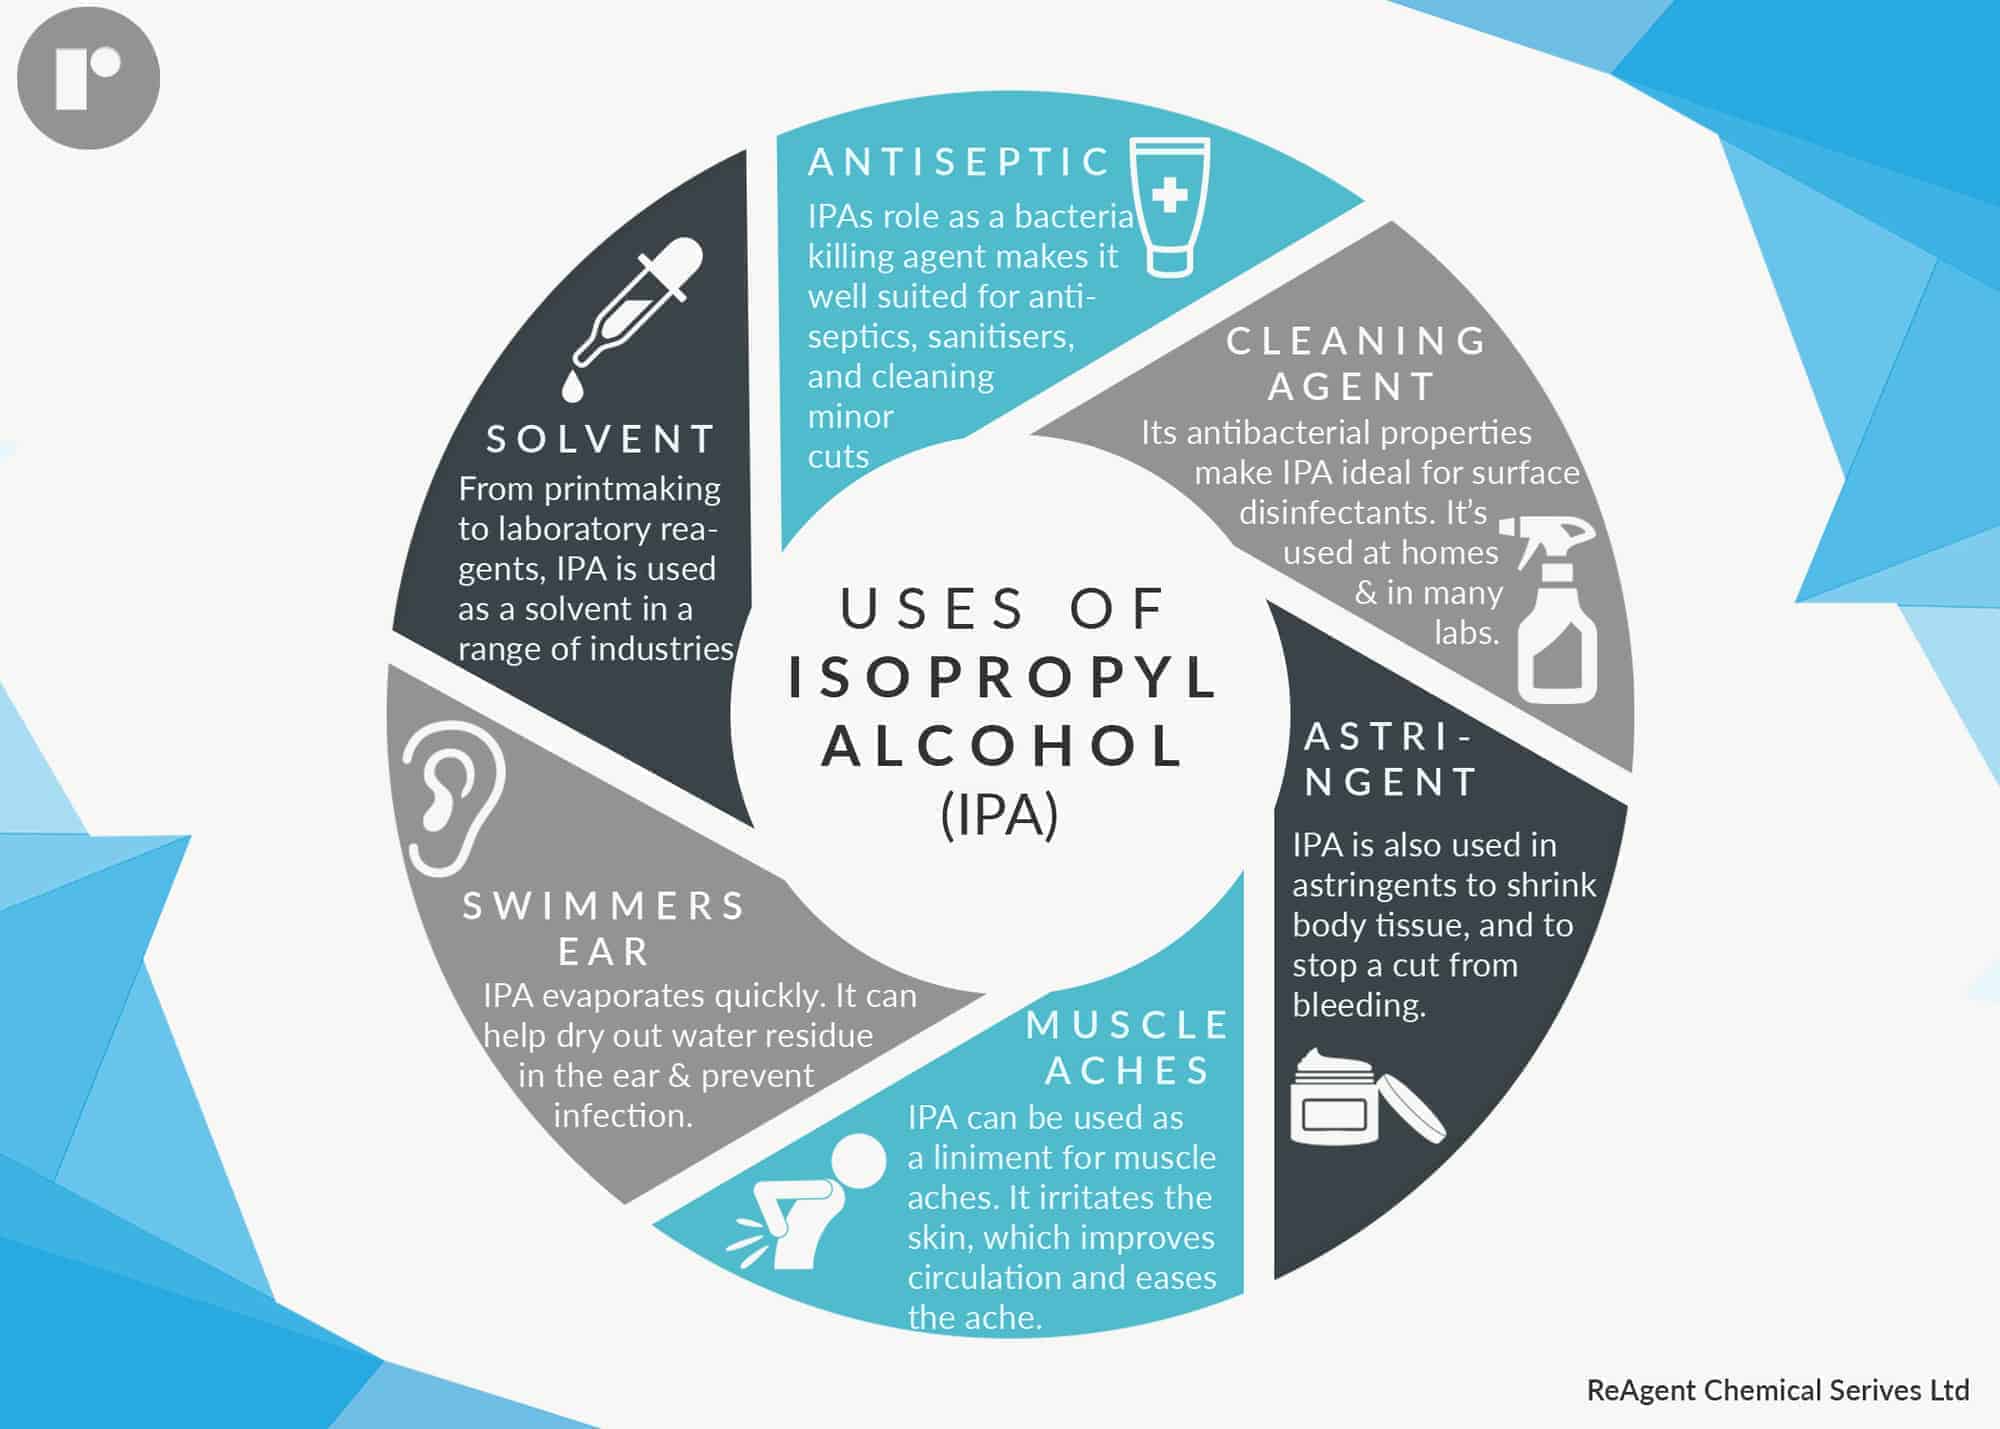 An infographic showing the different uses of isopropyl alcohol